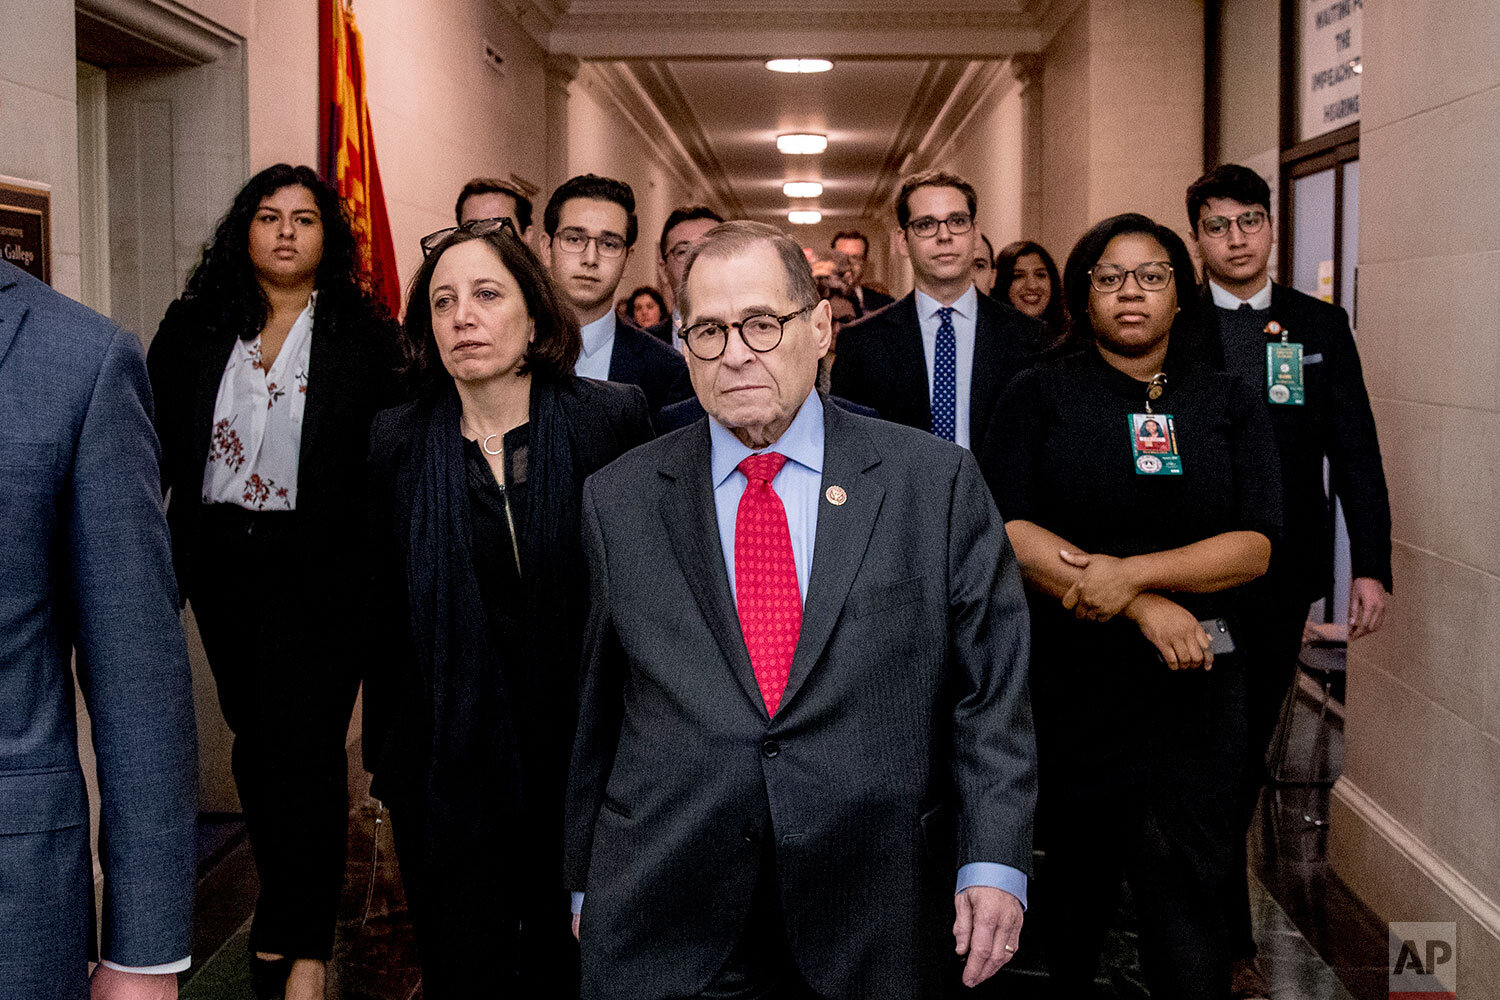  Chairman Jerrold Nadler, D-N.Y. leaves a House Judiciary Committee markup after passing both articles of impeachment, accusing President Donald Trump of abusing power and obstruction of Congress, Friday, Dec. 13, 2019, on Capitol Hill in Washington.